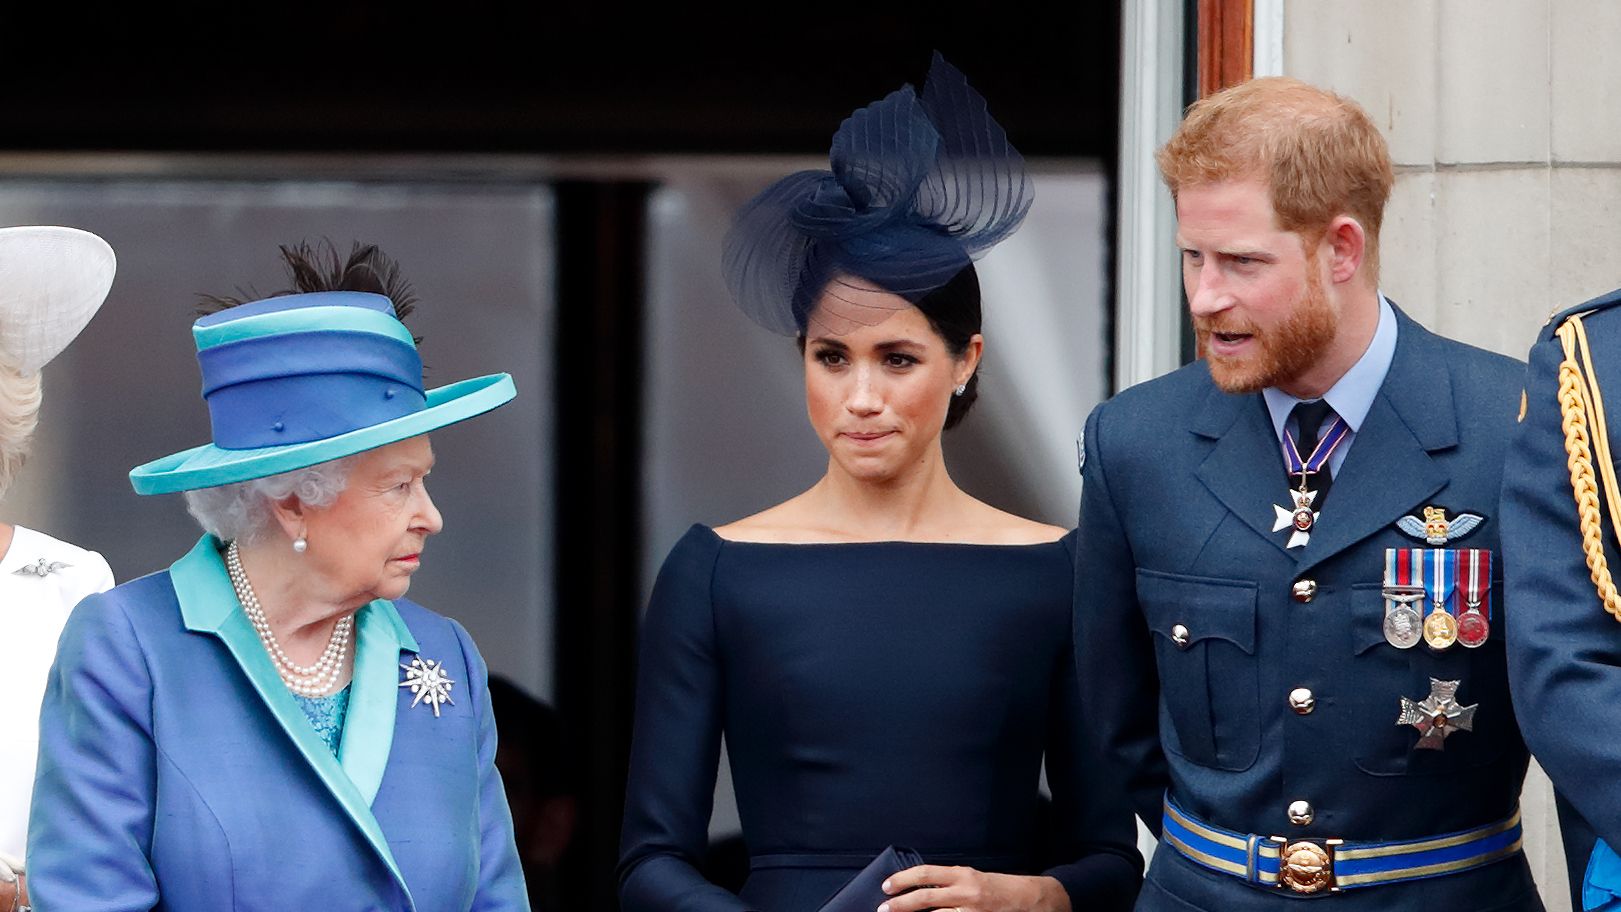 Prince Harry and Meghan Markle "Risking the Wrath of the Queen"